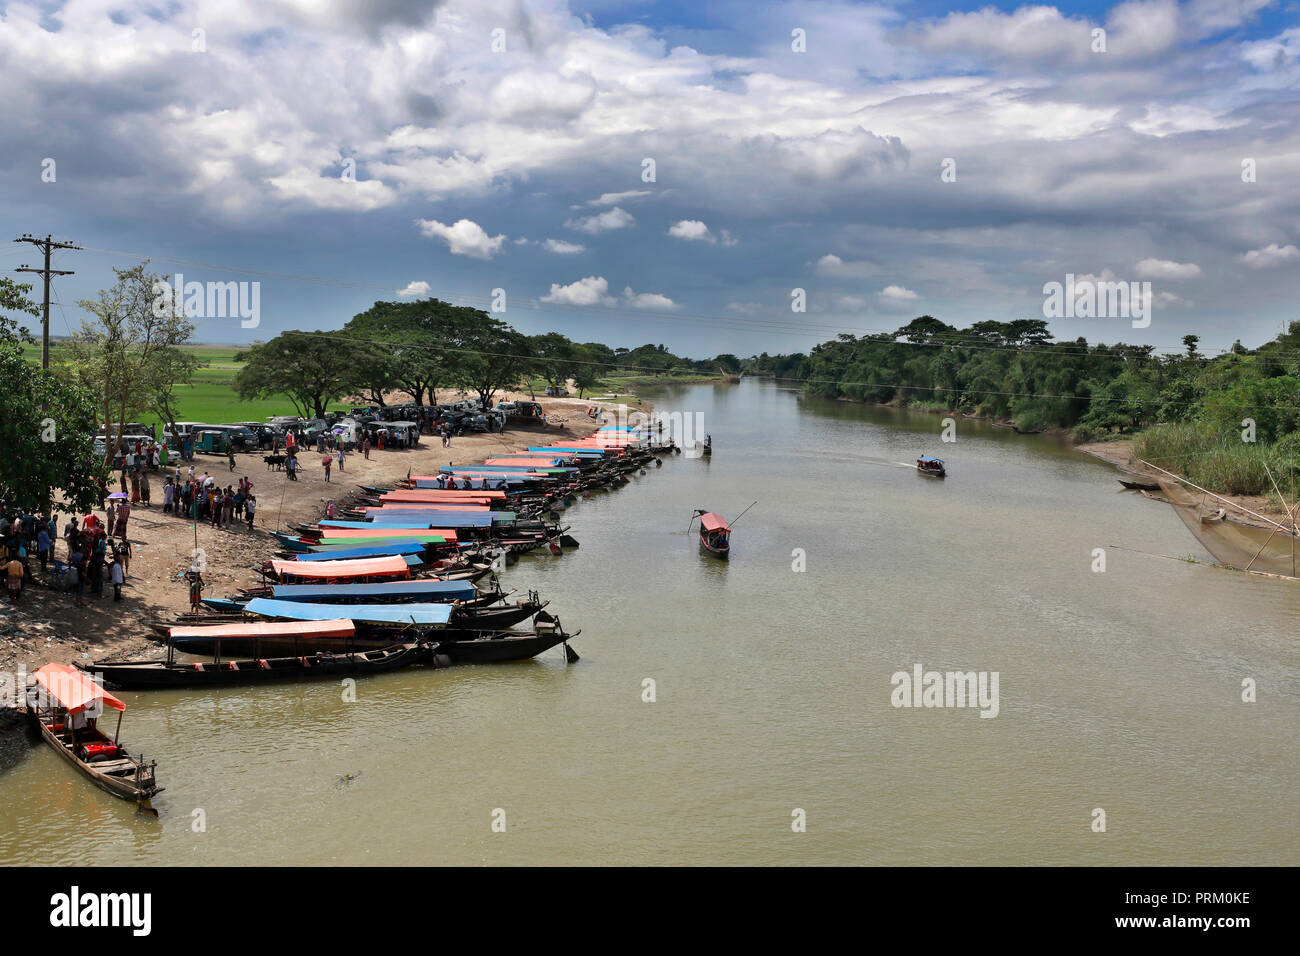 Sylhet, Bangladesh - September 22, 2018: Piyain River a trans-boundary river of India and Bangladesh. It is a tributary of the Surma River, which is o Stock Photo